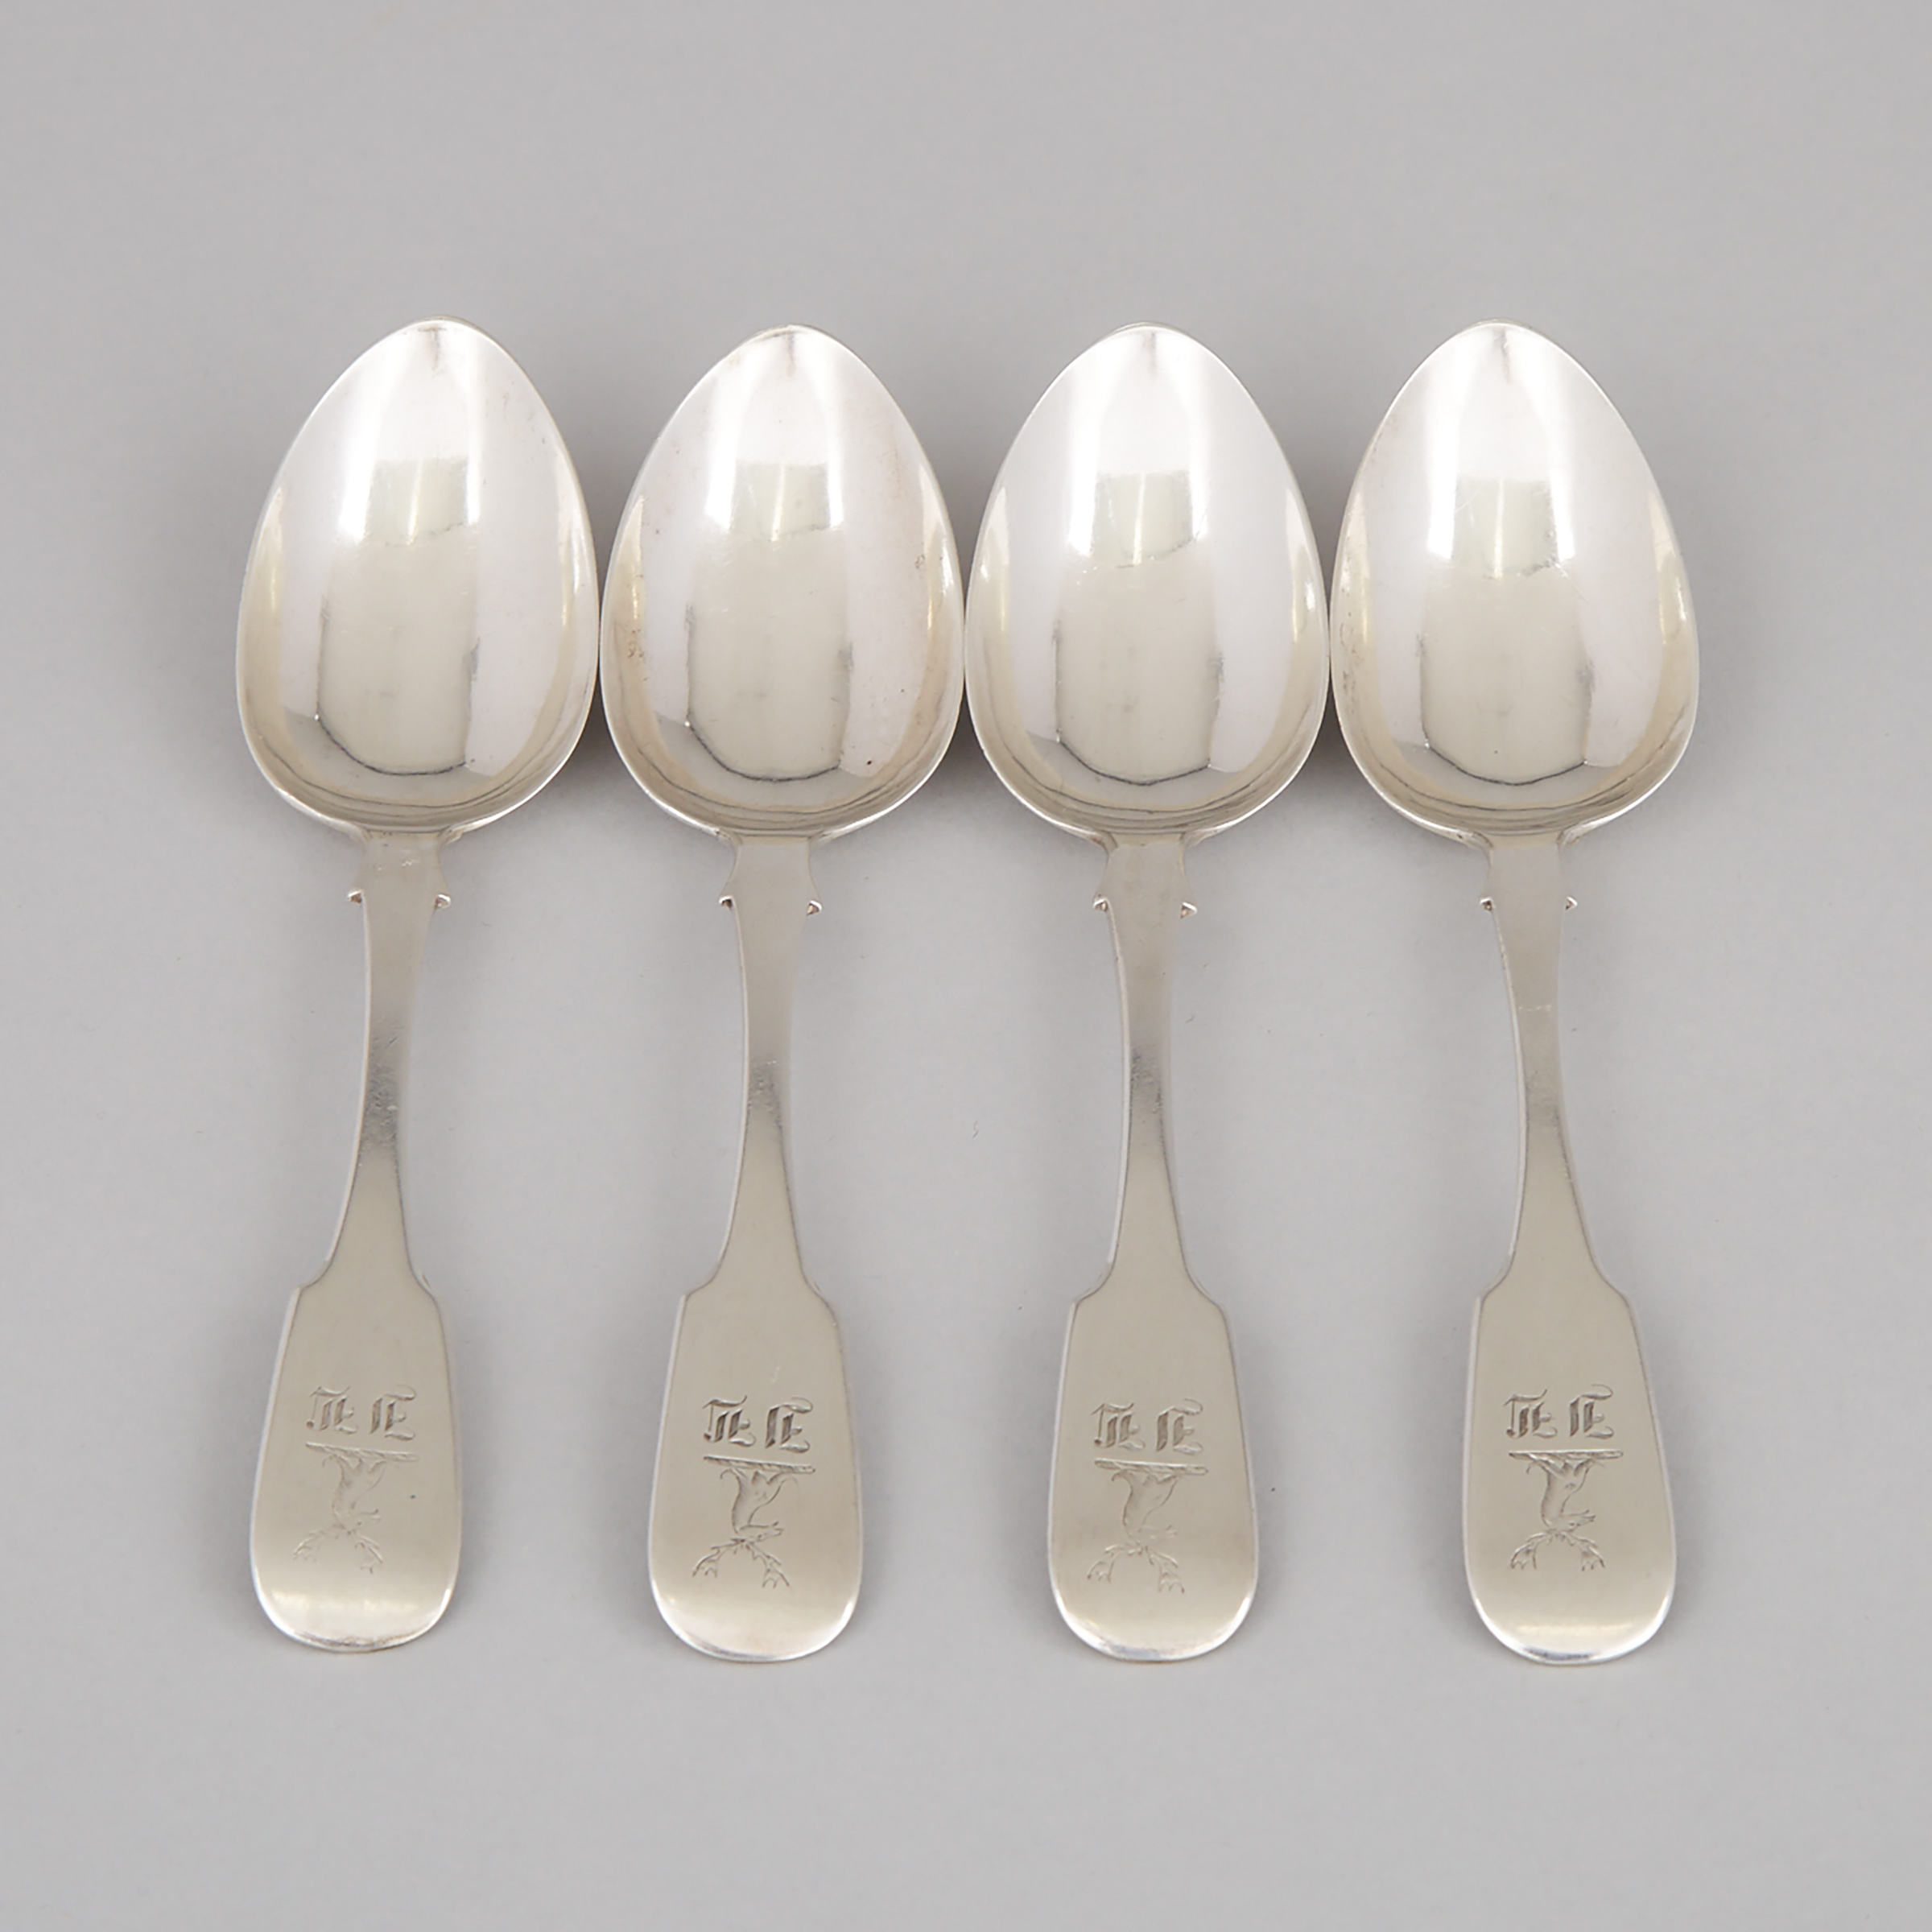 Four Canadian Silver Fiddle Pattern Dessert Spoons, Peter Bohle, Montreal, Que., c.1853-56